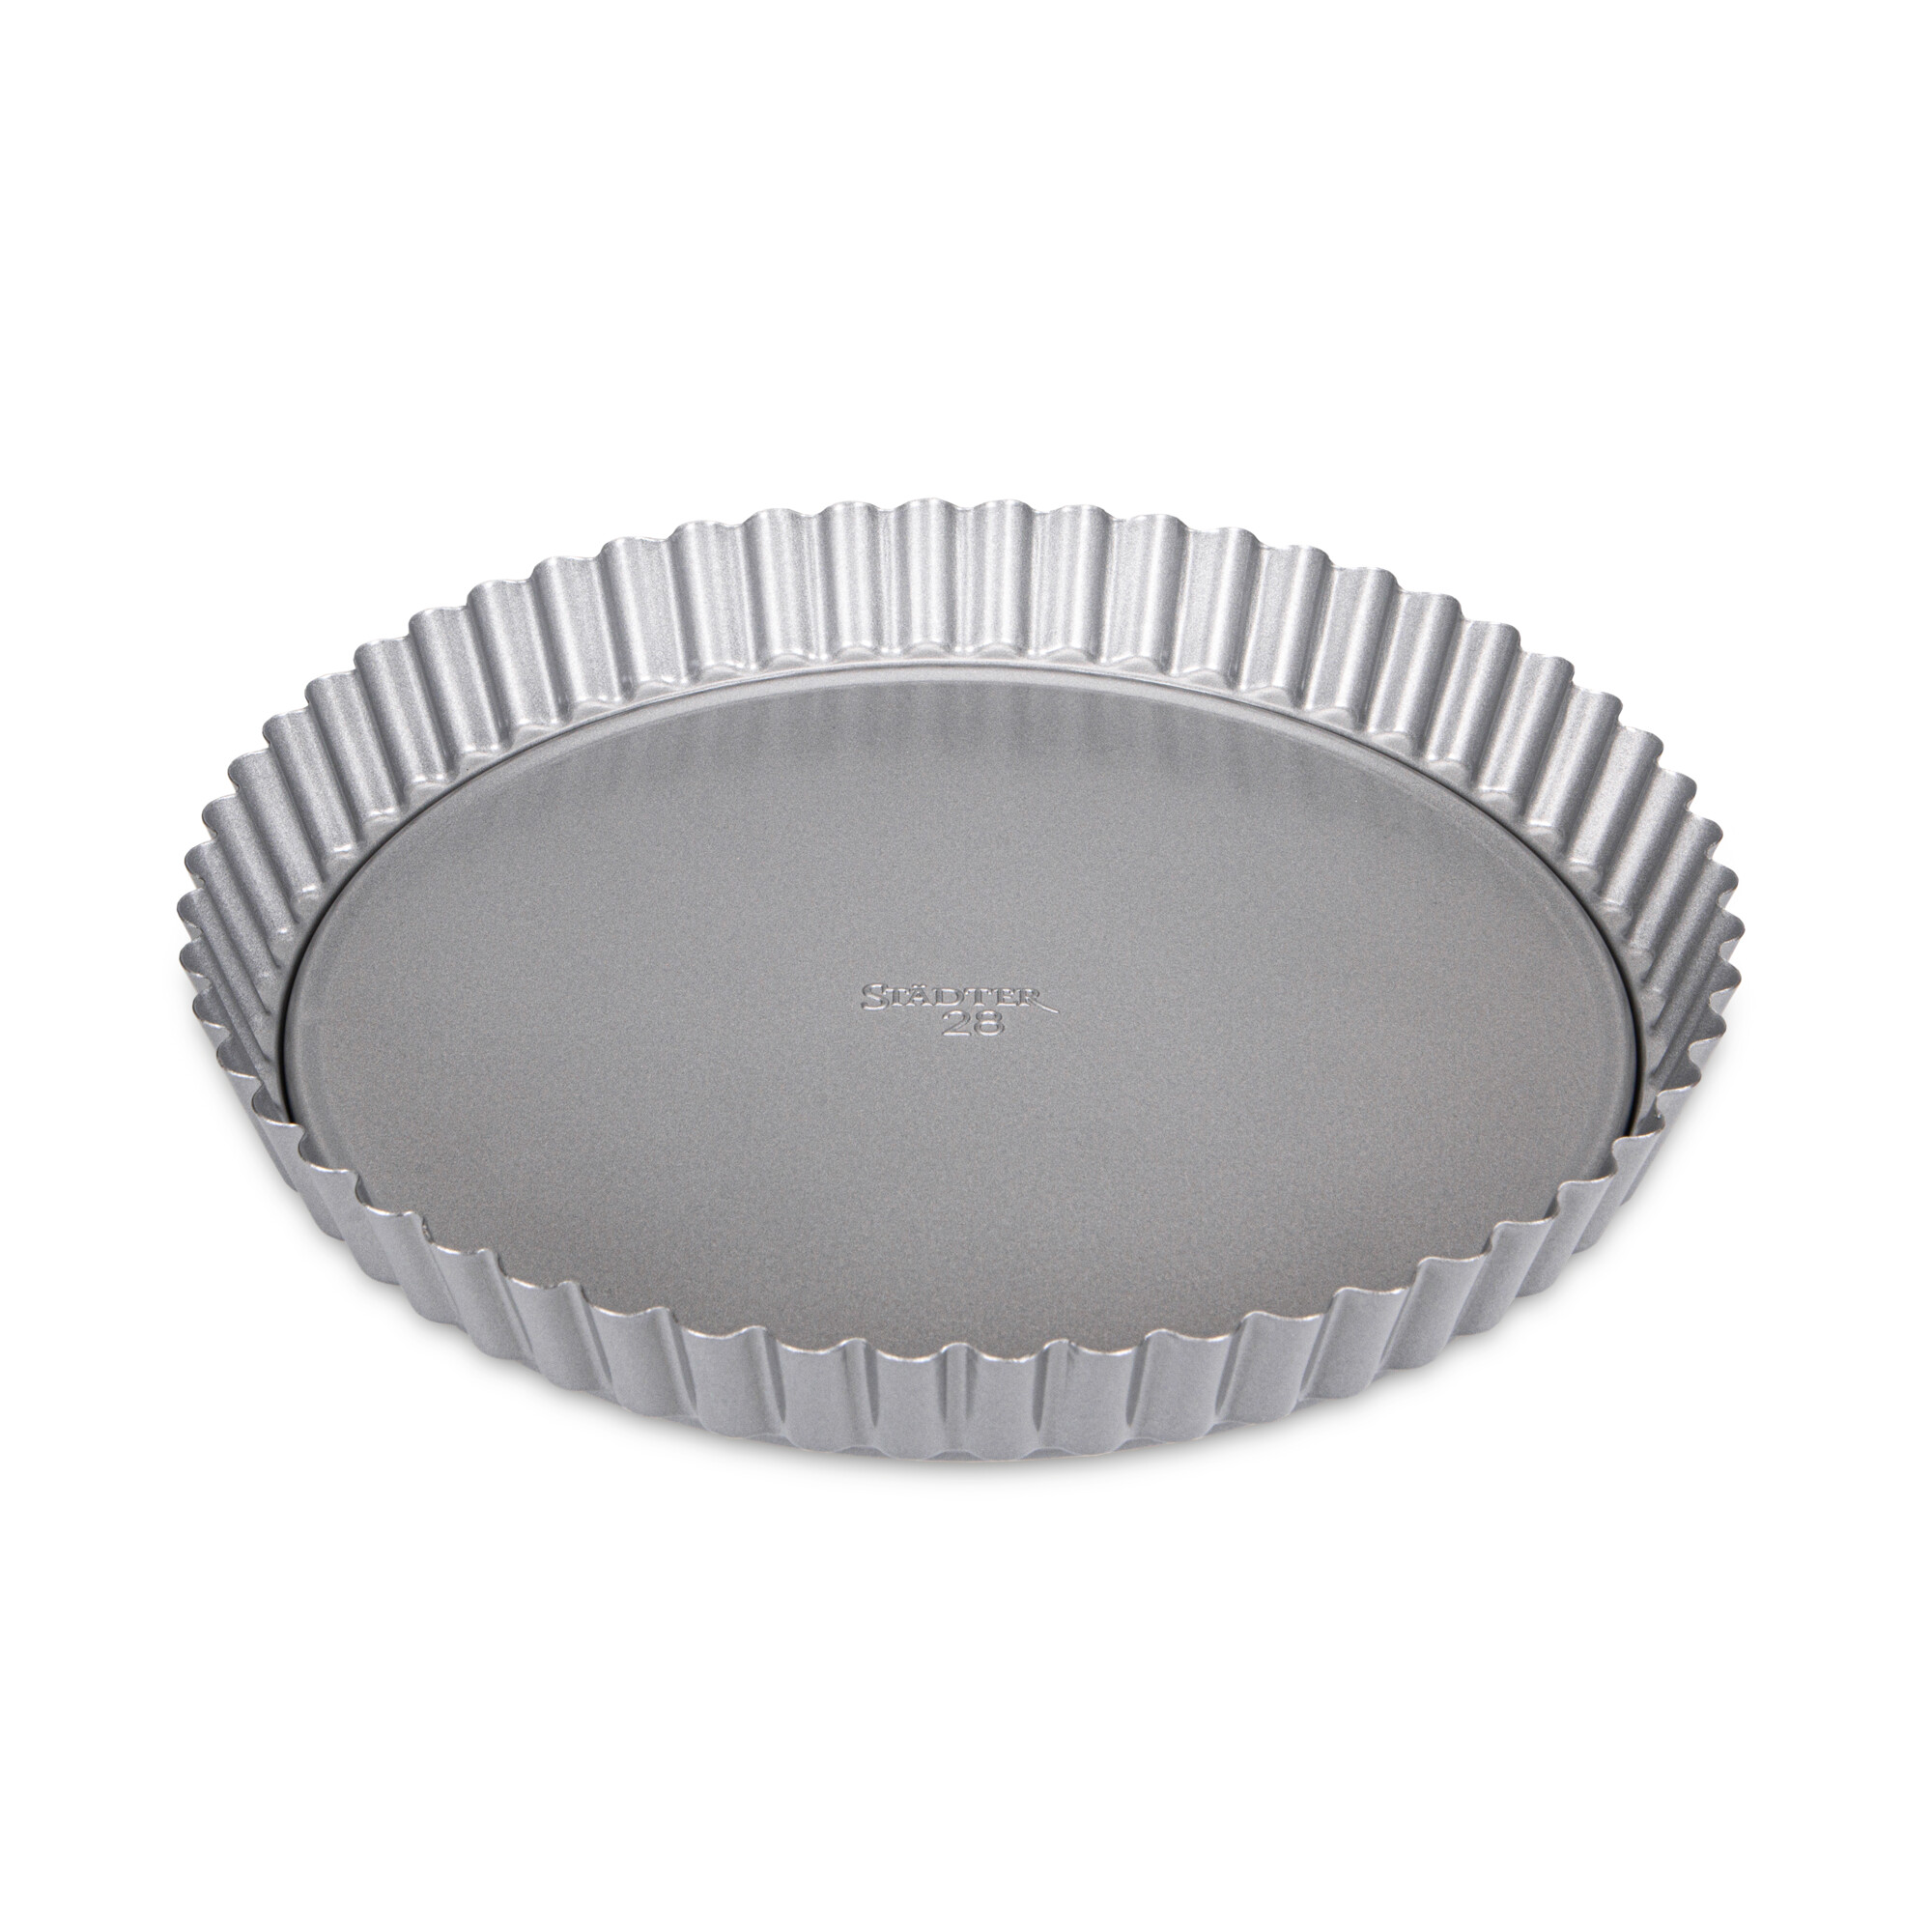 we love baking – Tart tin with removable bottom – Round